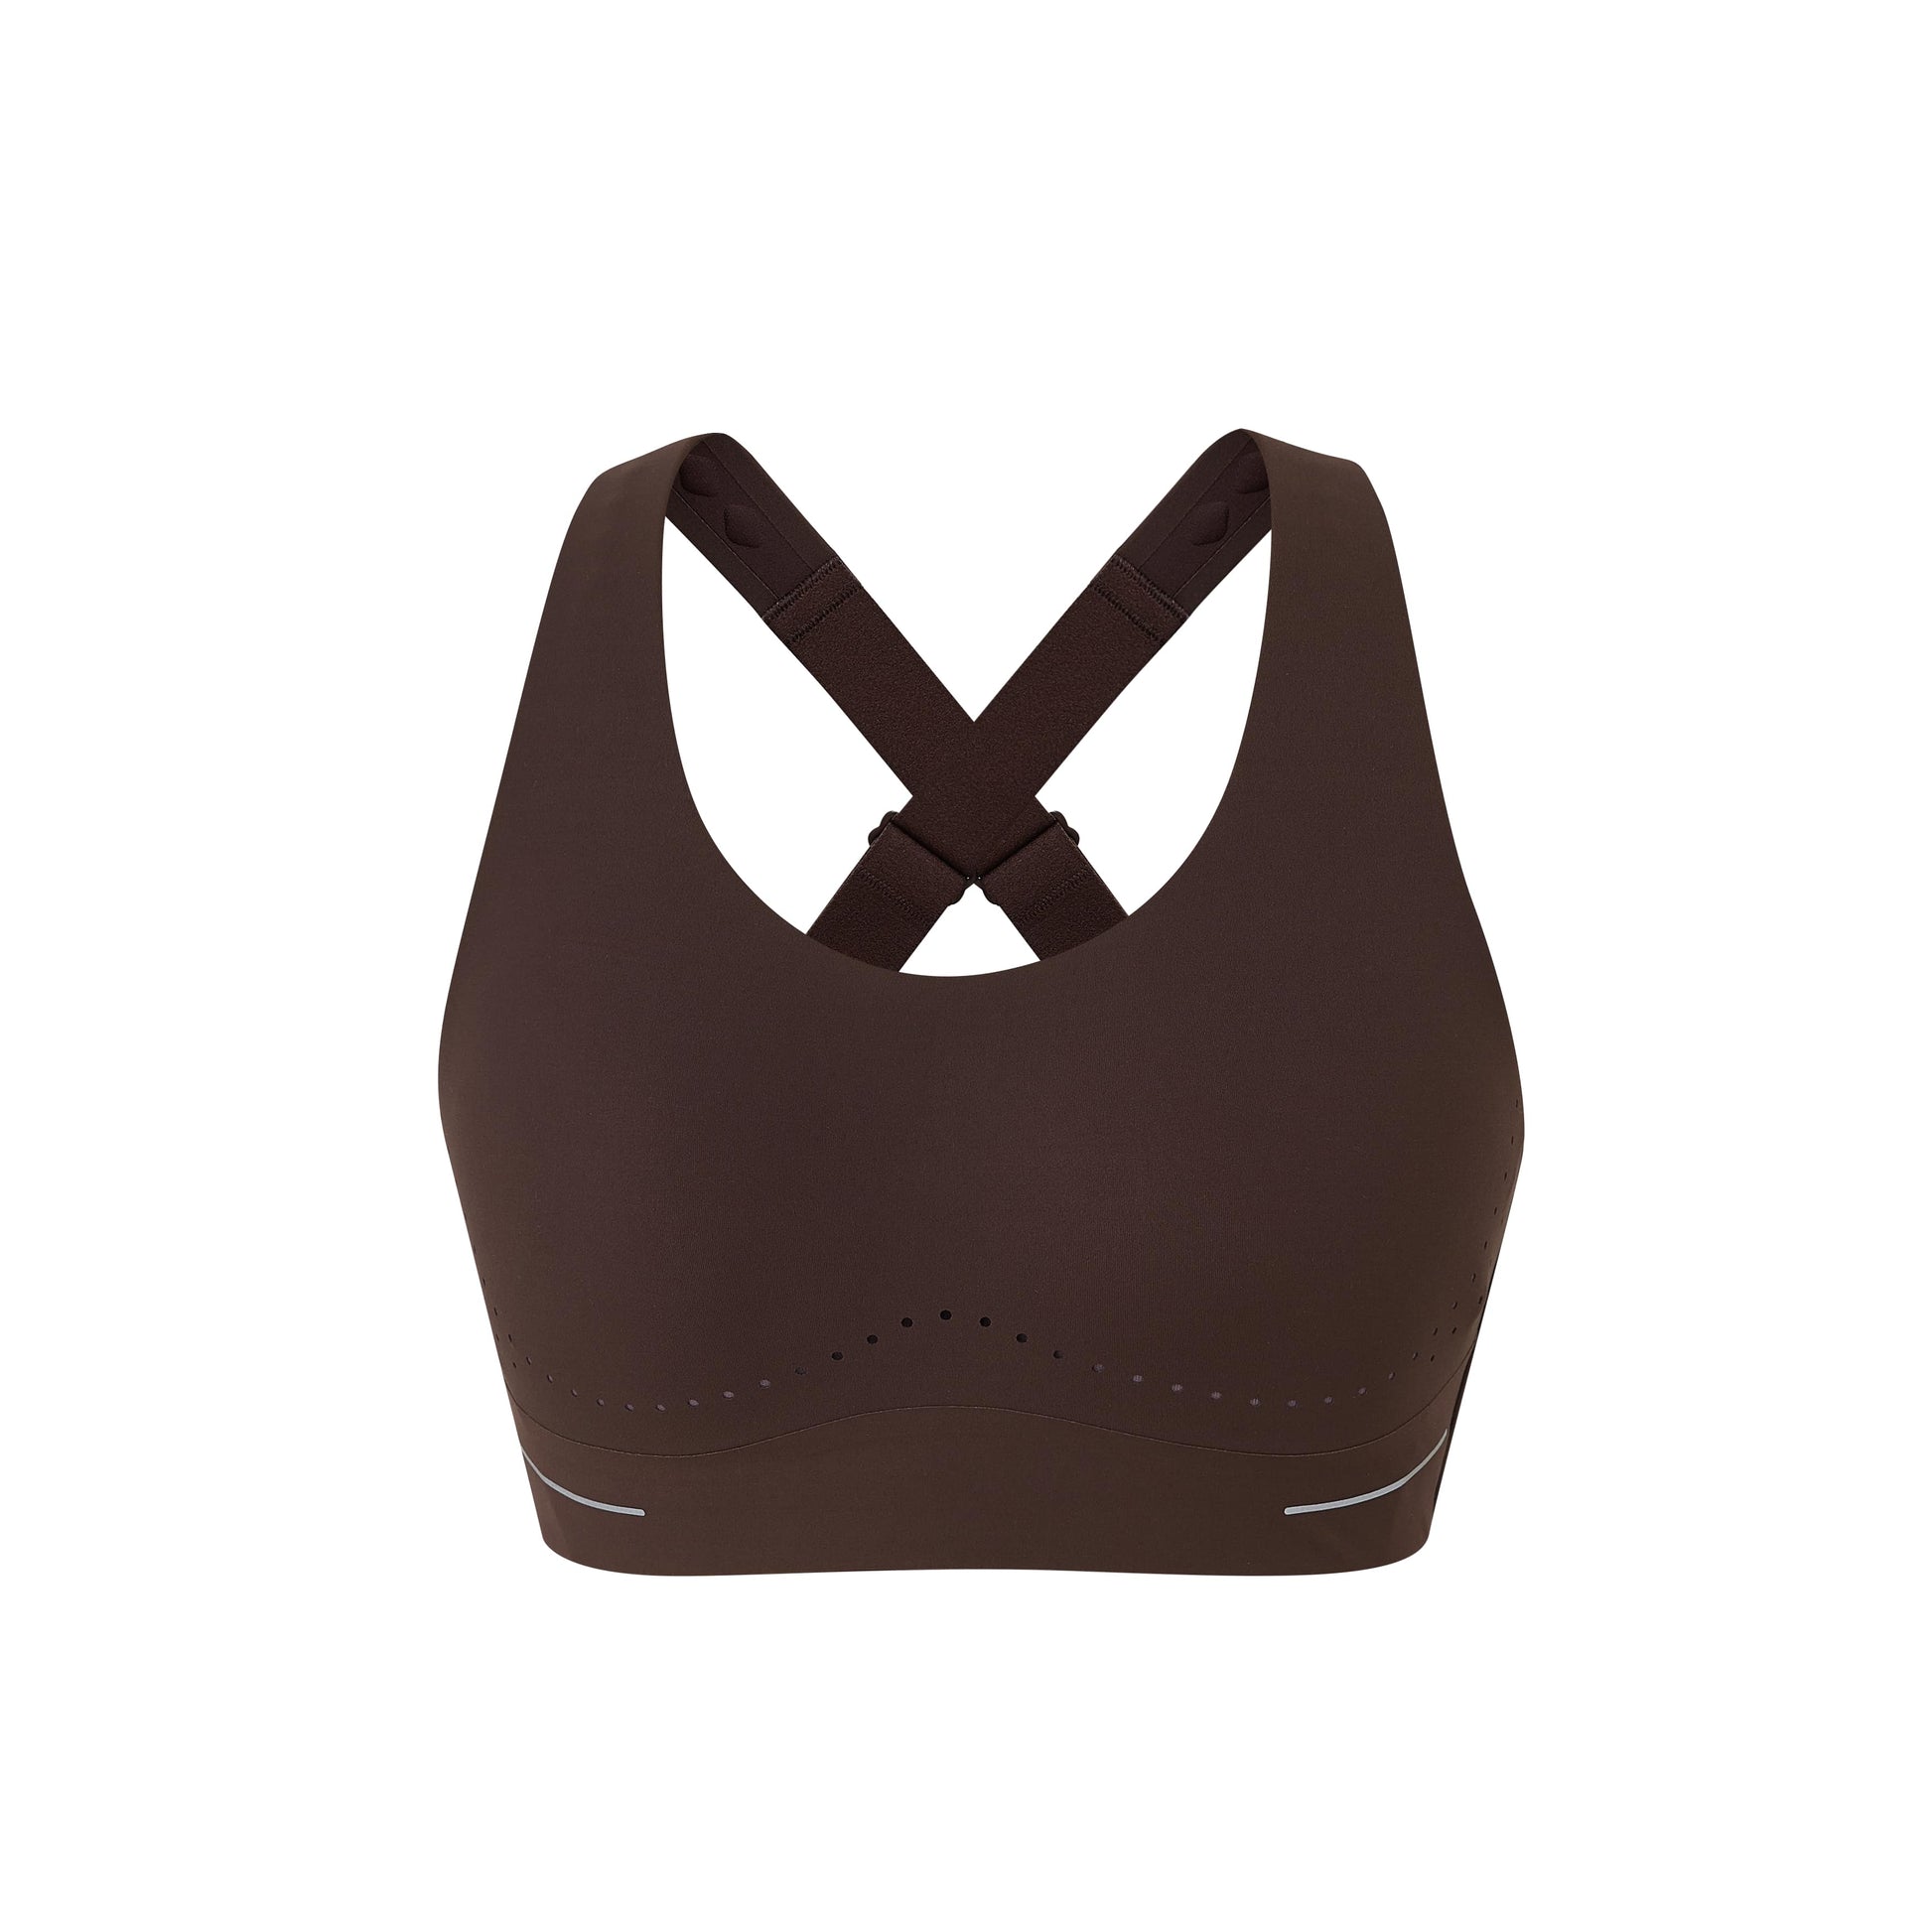 Halara NWT sports bra S - $32 New With Tags - From Brittany